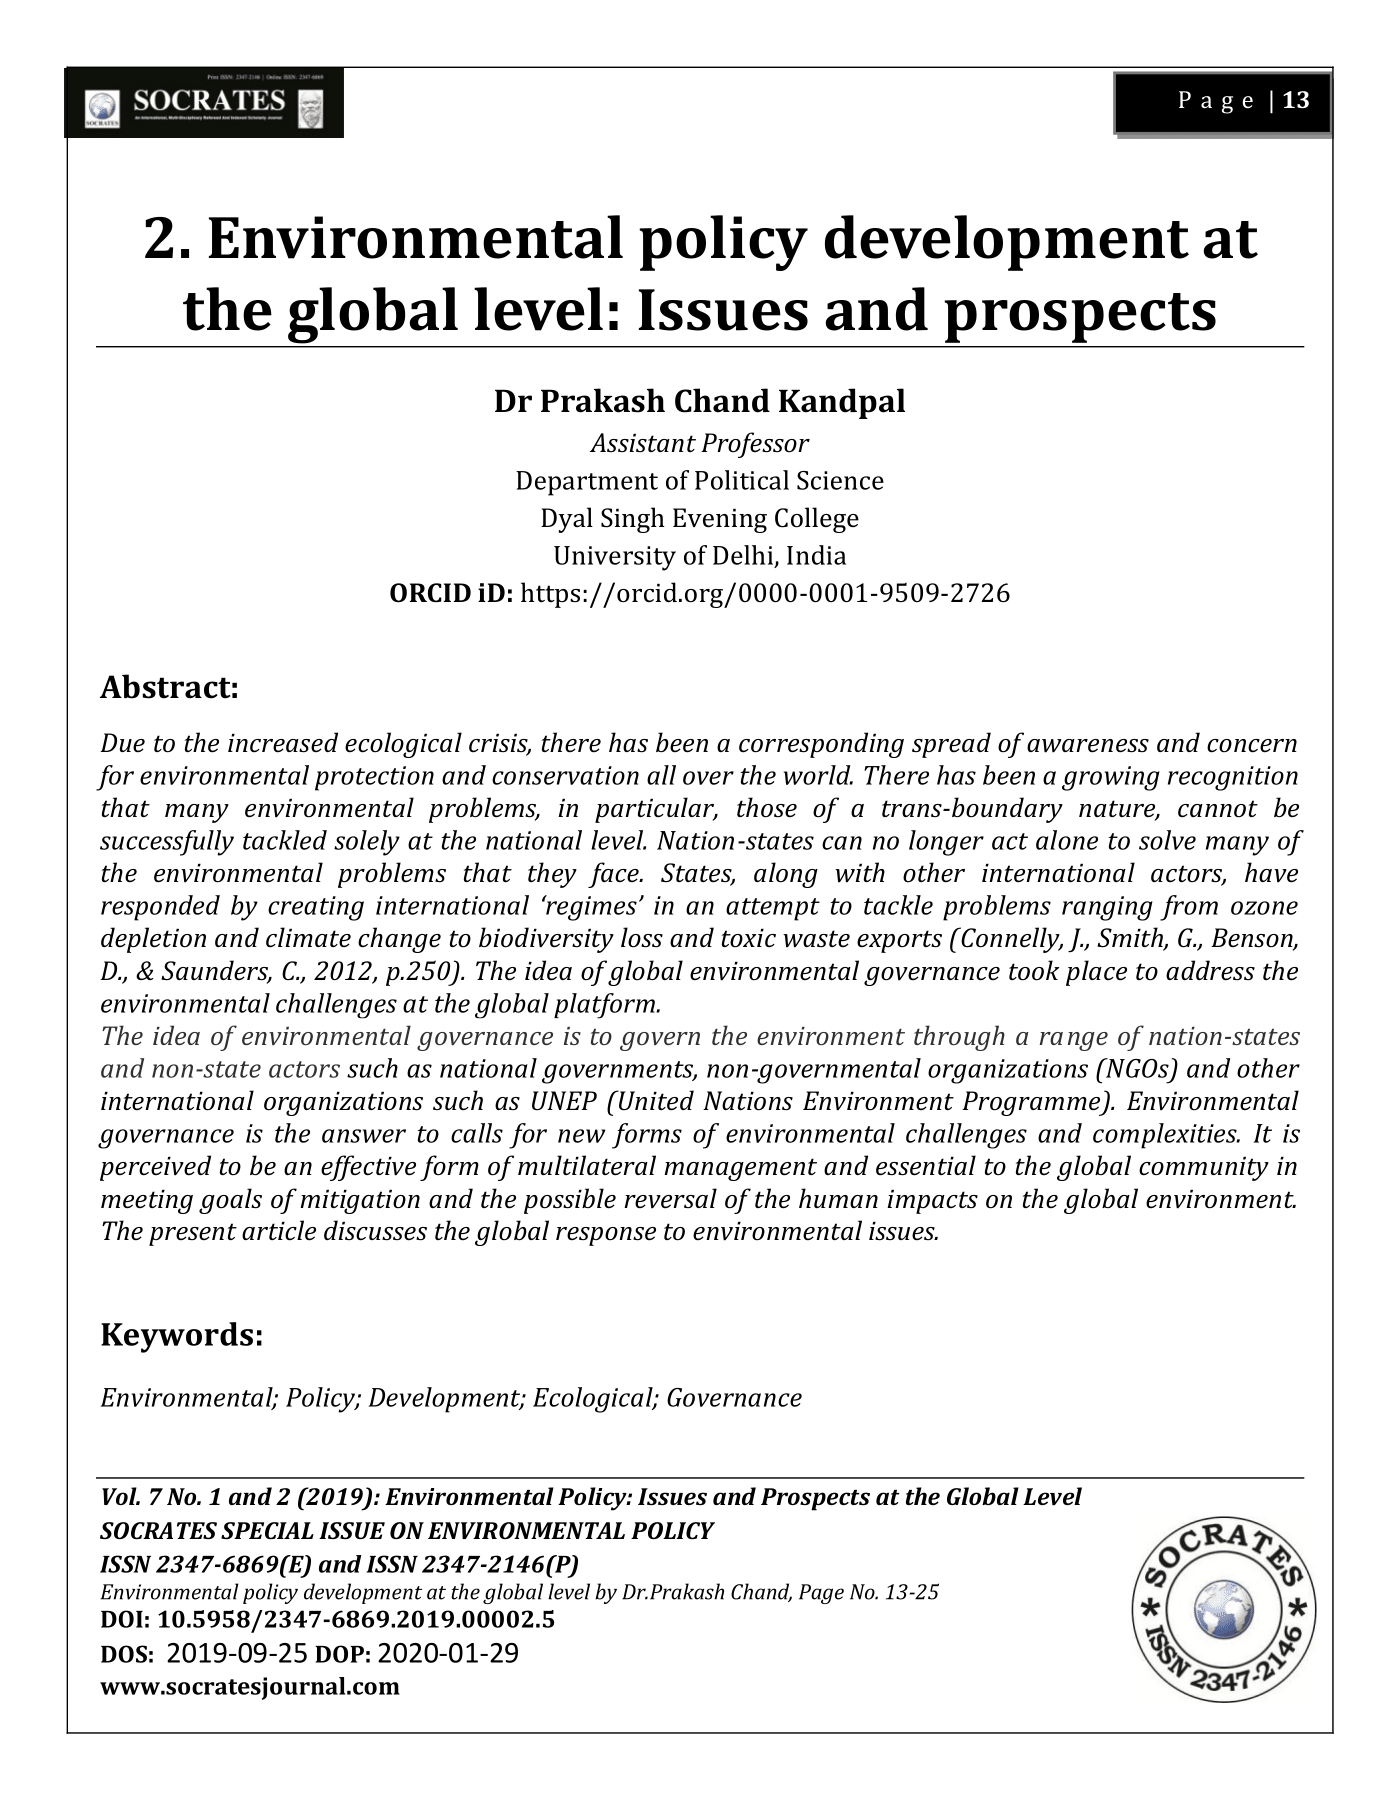 Environmental policy development at the global level